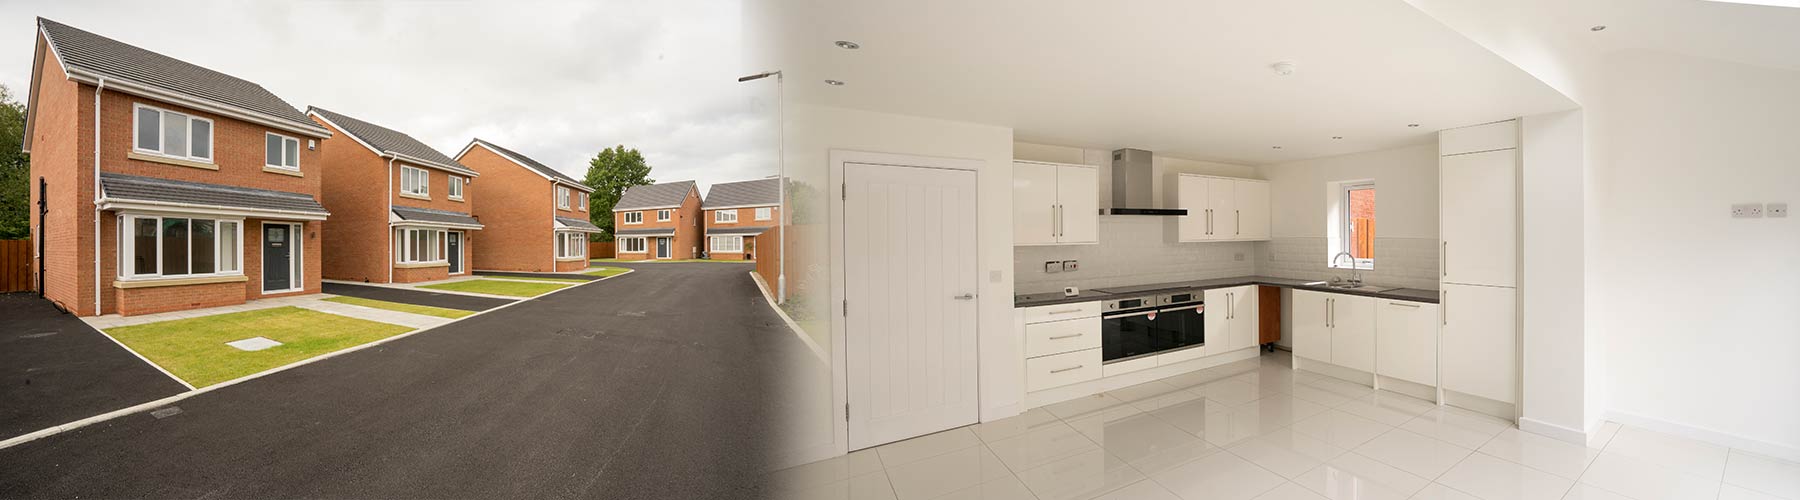 Our Kitchen Installers team, installed five brand new kitchens throughout this new build in Liverpool.